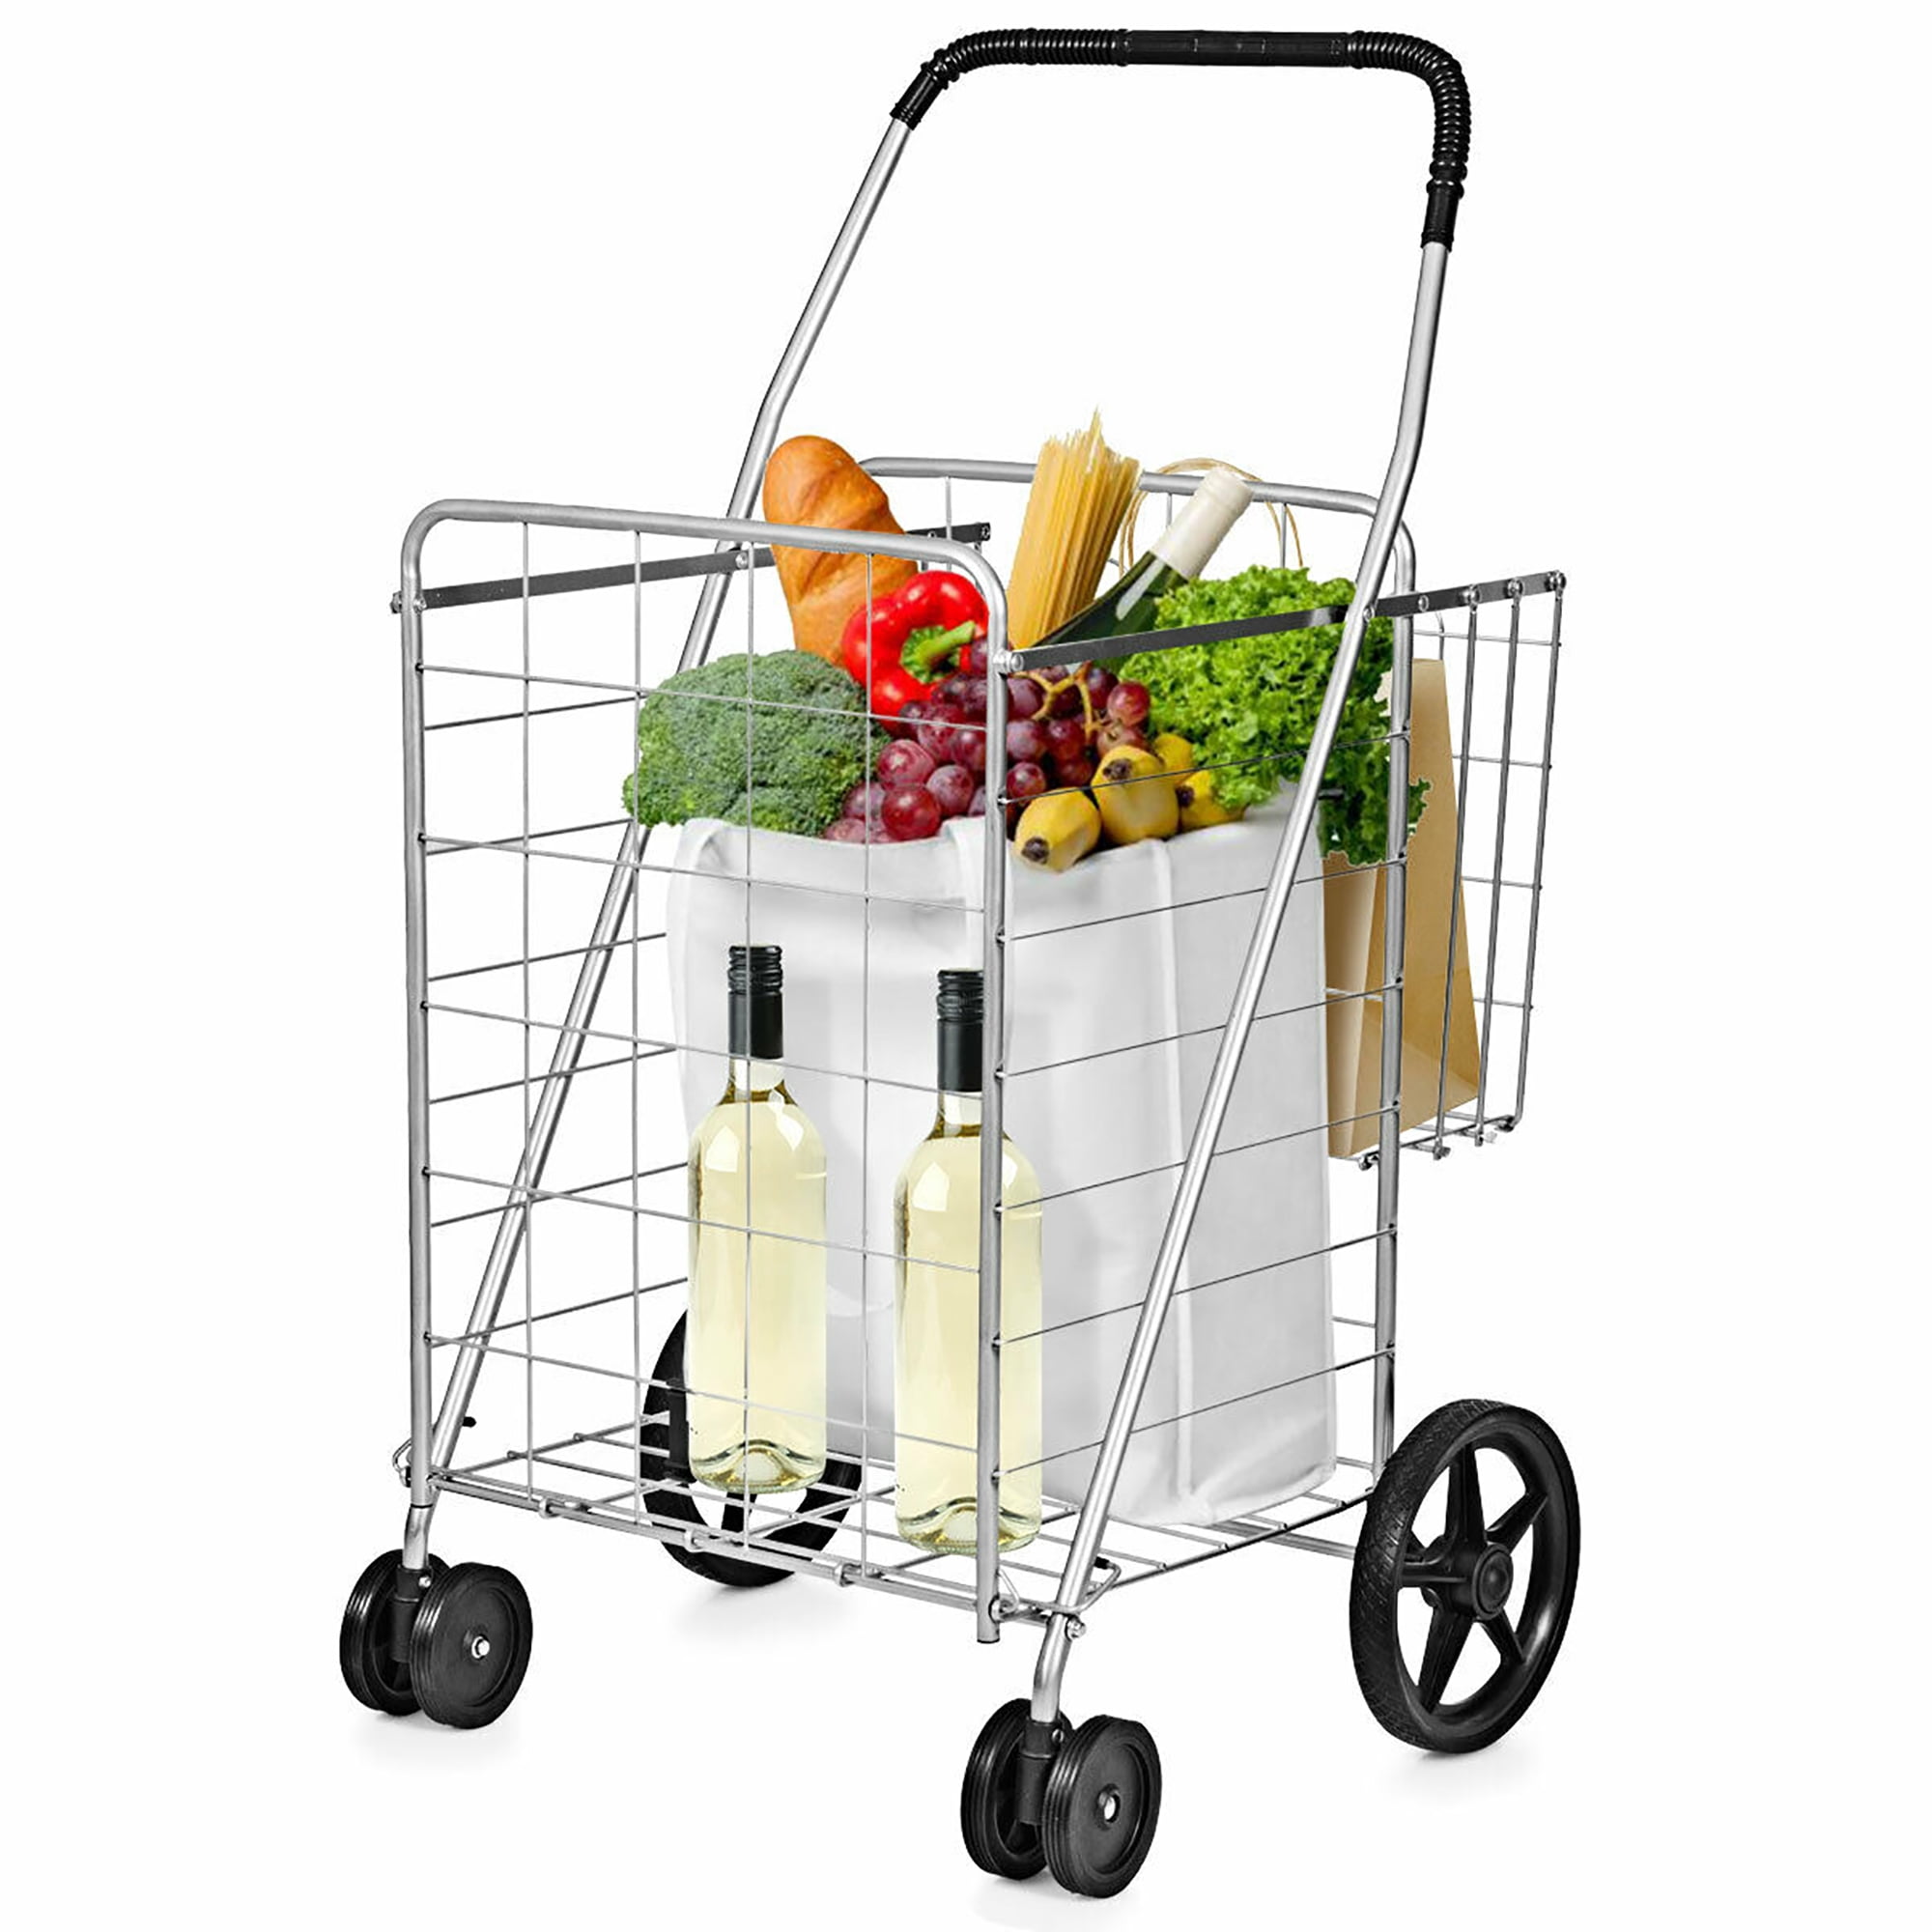 Details about   Utility Shopping Cart Foldable Jumbo Basket Grocery Laundry w/ Wheels Silver 